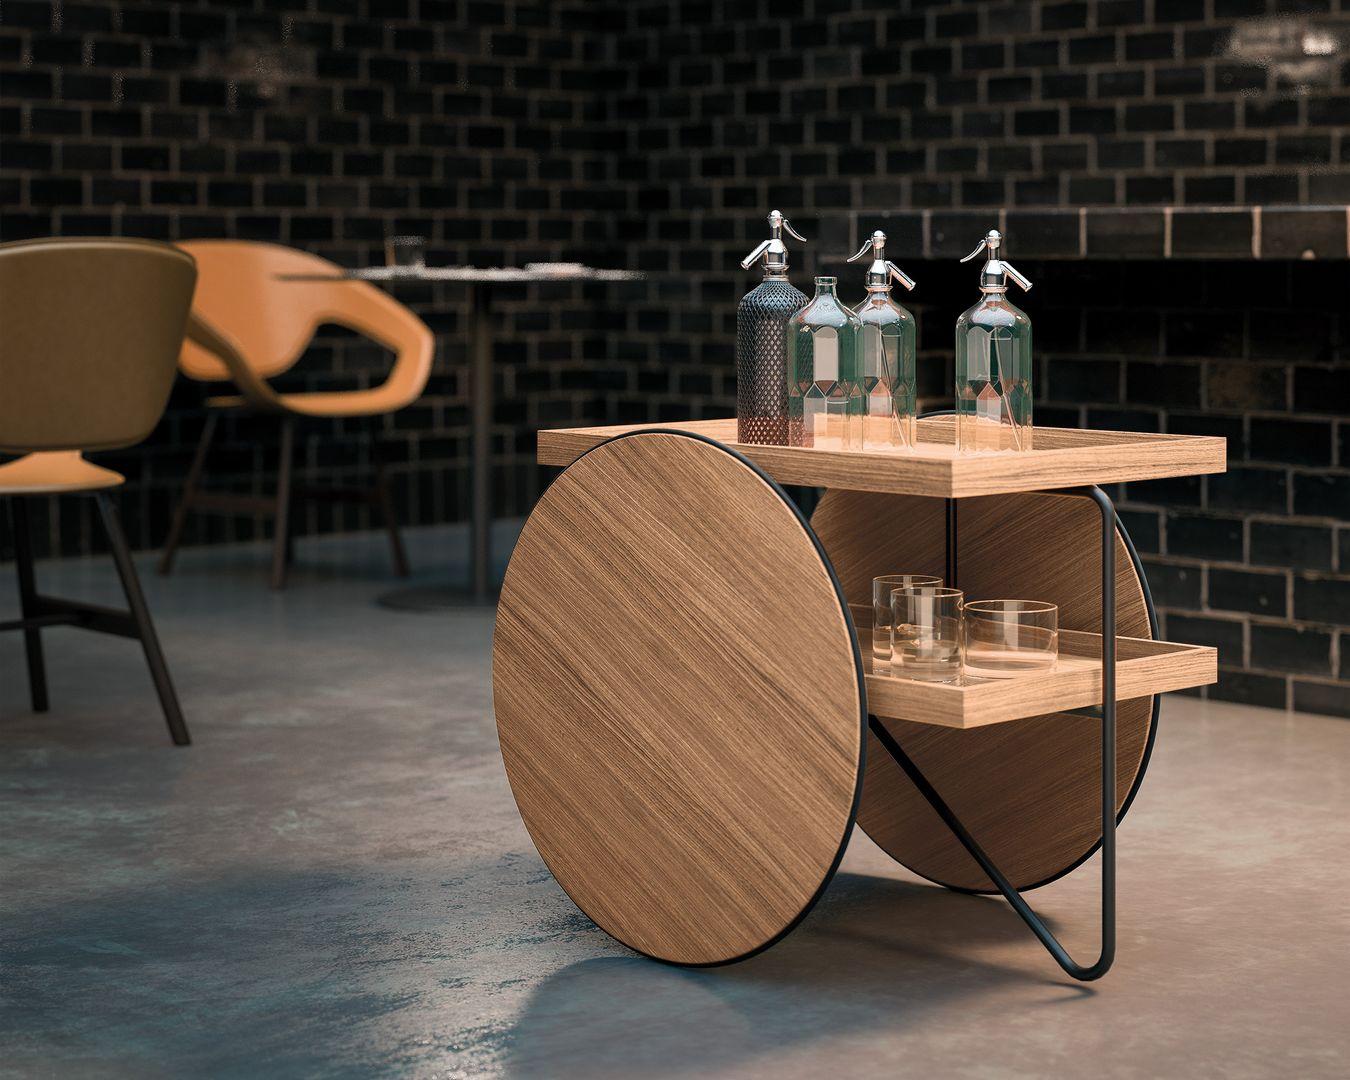 Chariot is a mobile table consisting of three simple elements joined together: wheels, trays and structure. The wheels, which in common carts are usually small, are brought to the extreme size, becoming the iconic element of the project. The rubber